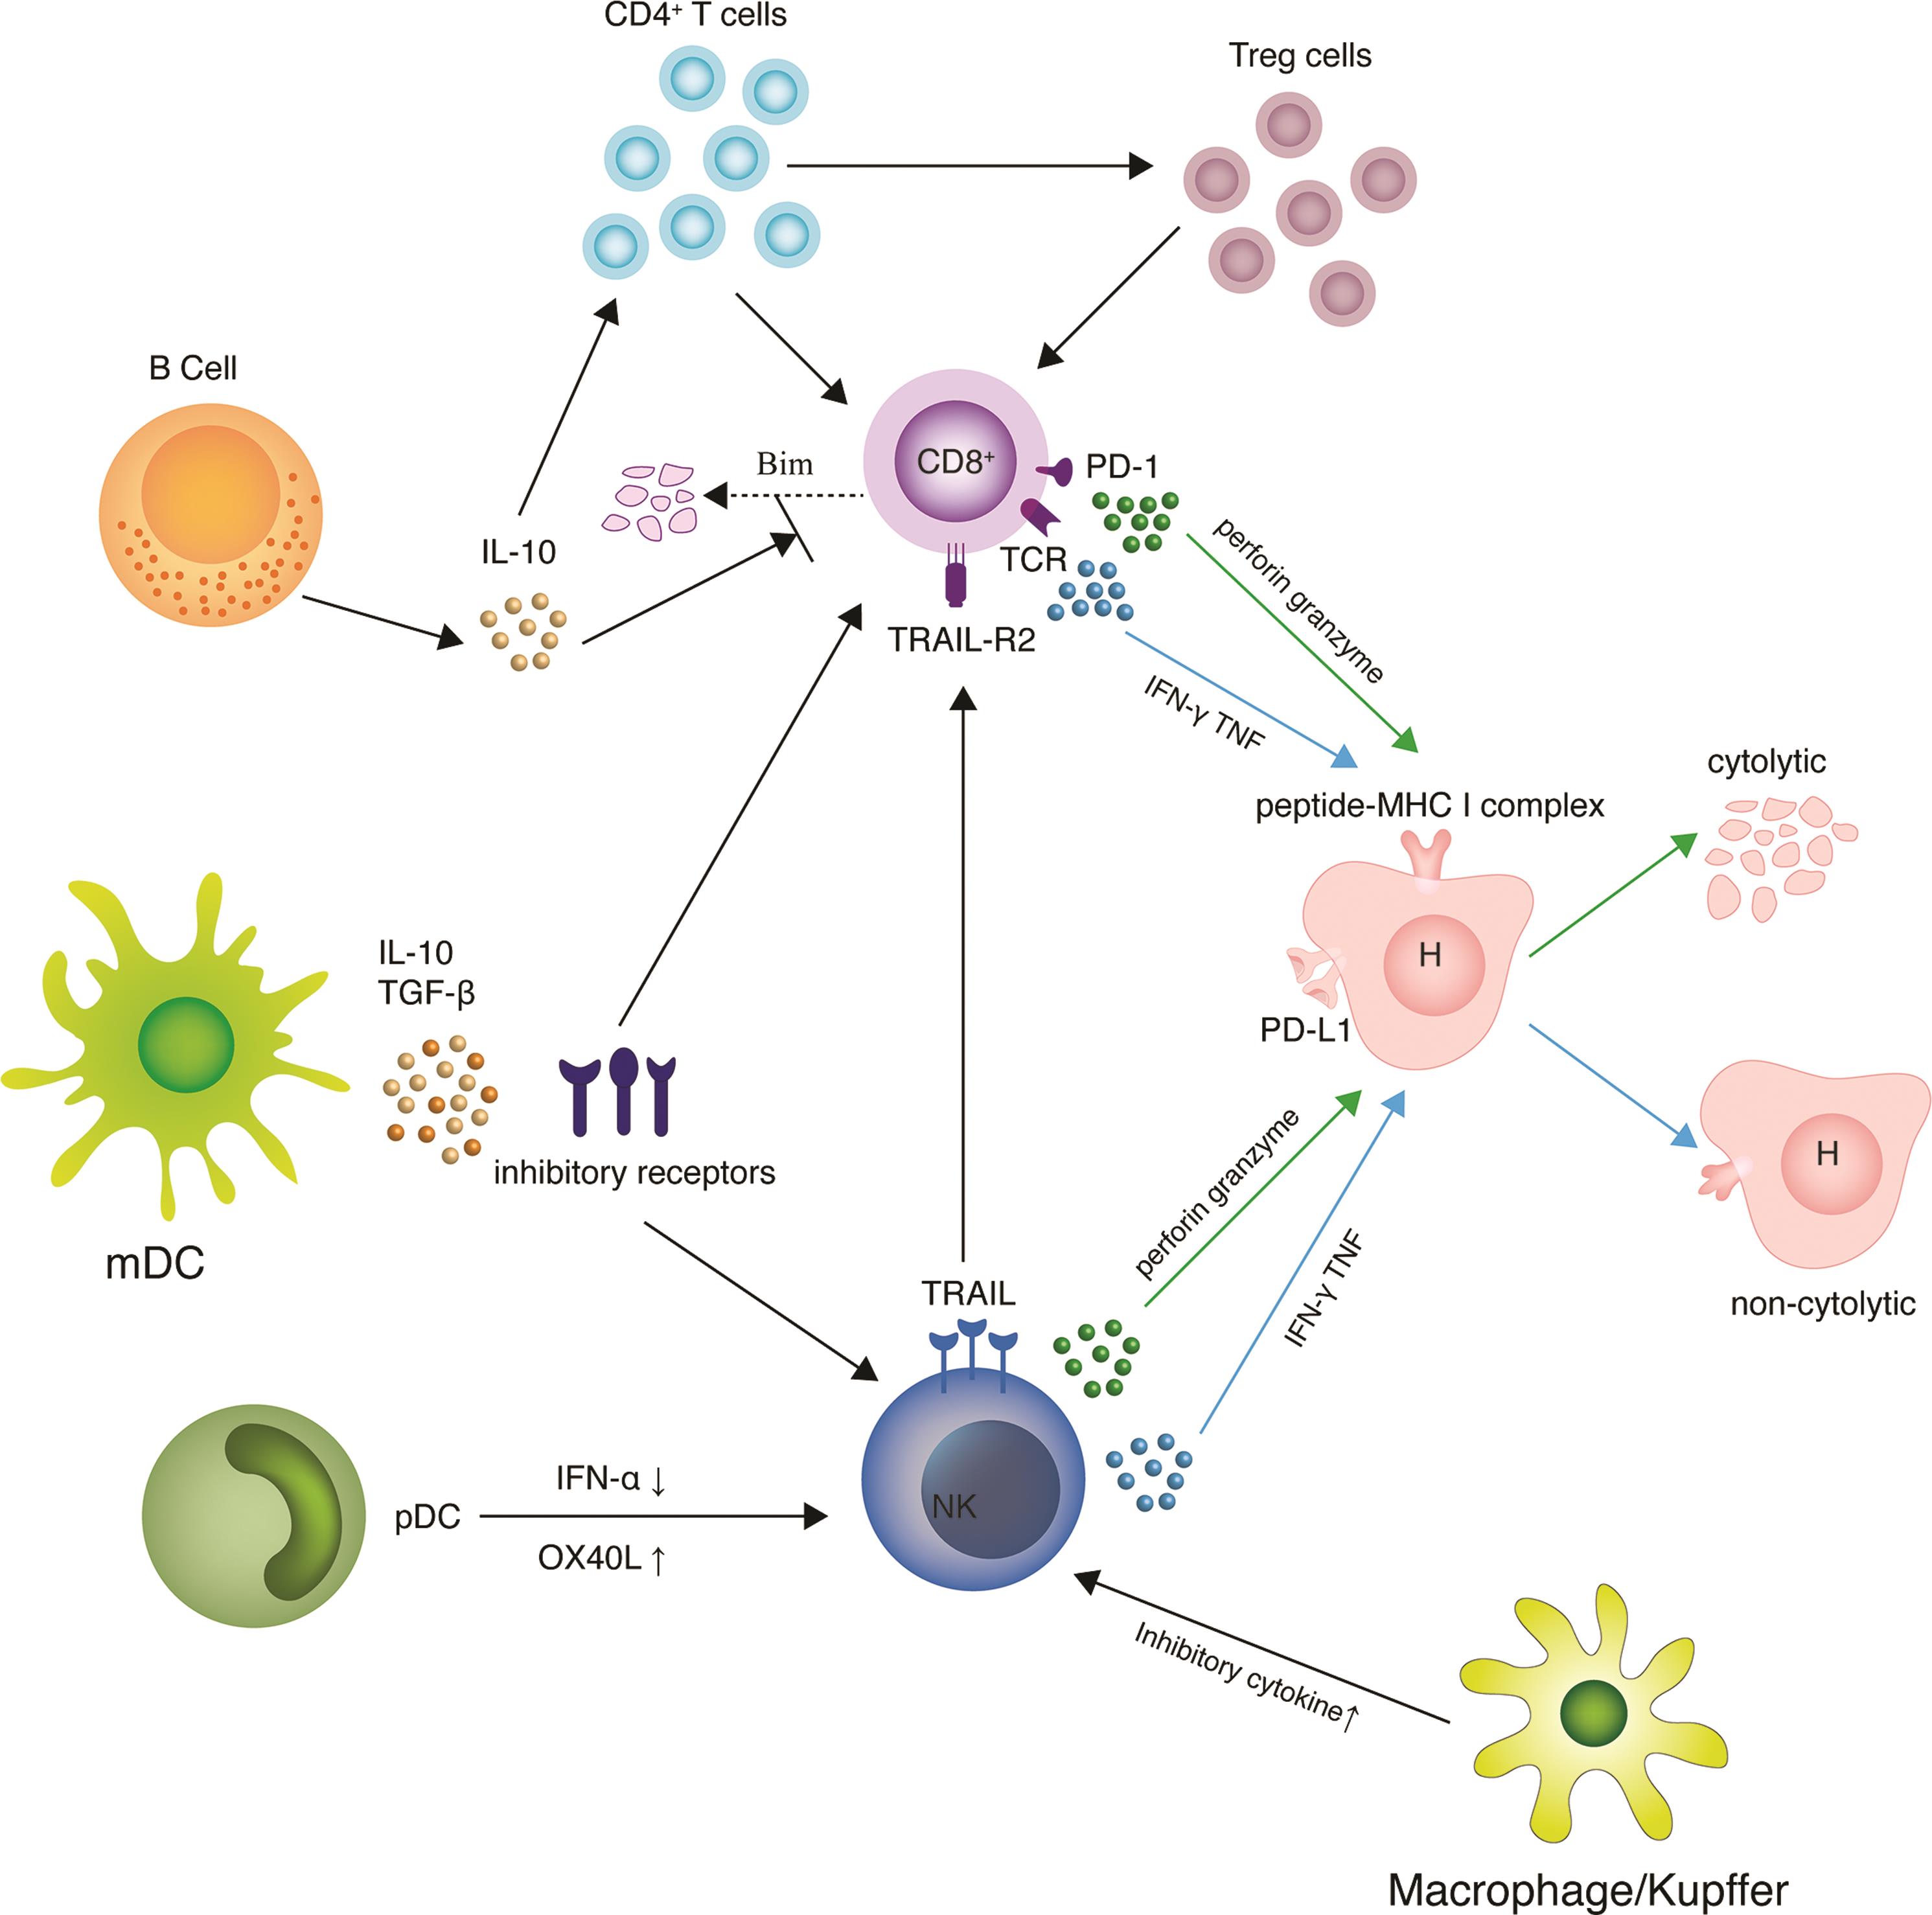 Natural killer cells and hepatitis B virus (HBV)-specific CD8<sup>+</sup> T cells are centrally involved in the HBV immune response.